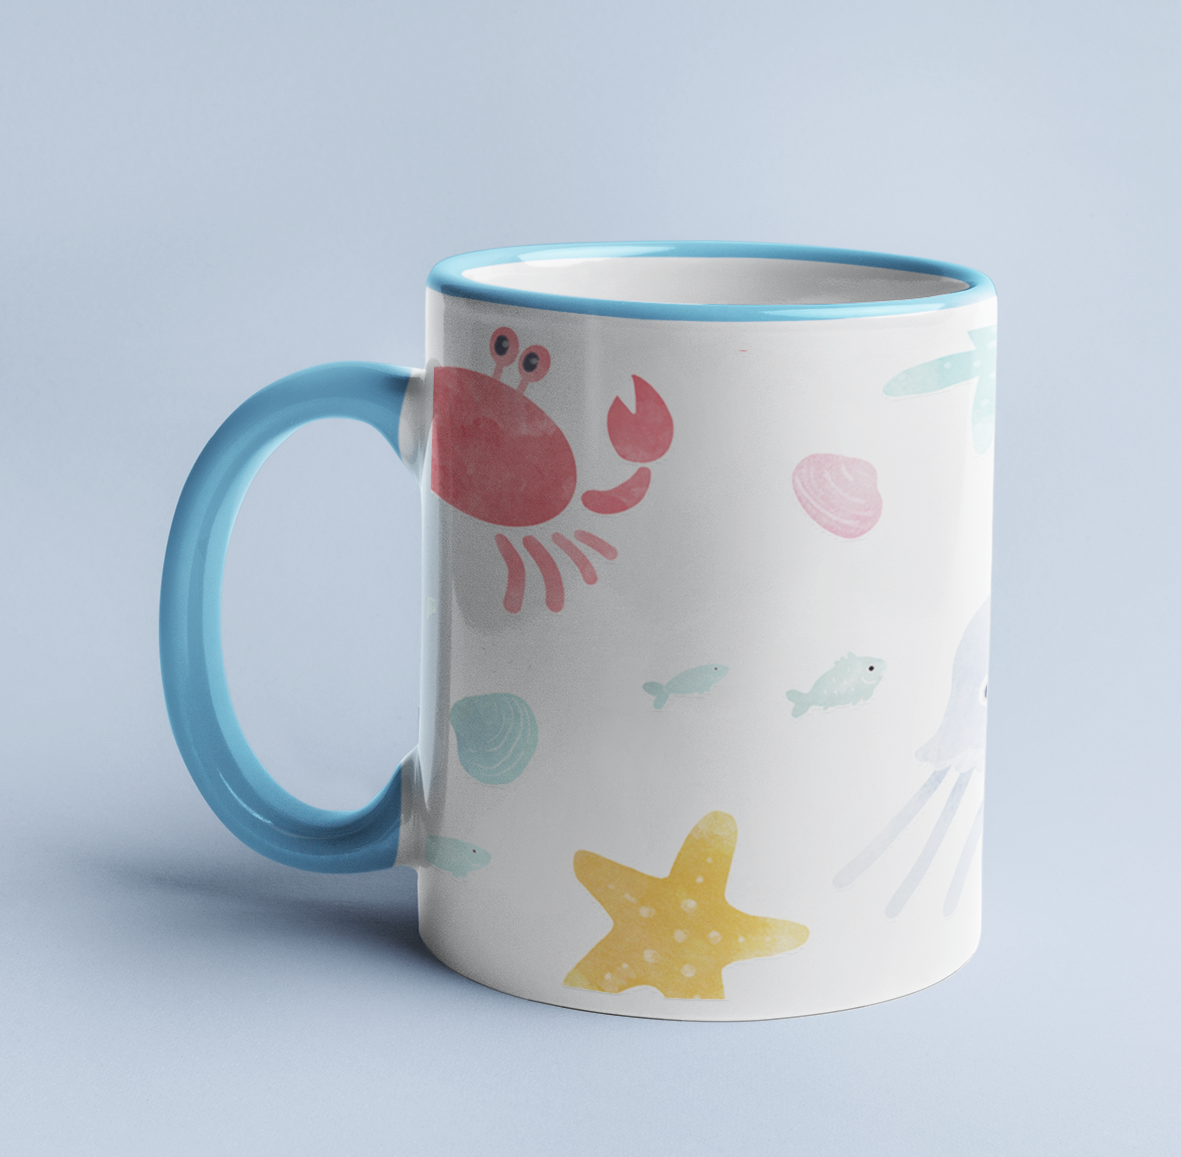 Watercolor Sea Creatures mug on a light blue background, with a light blue handle and rim.